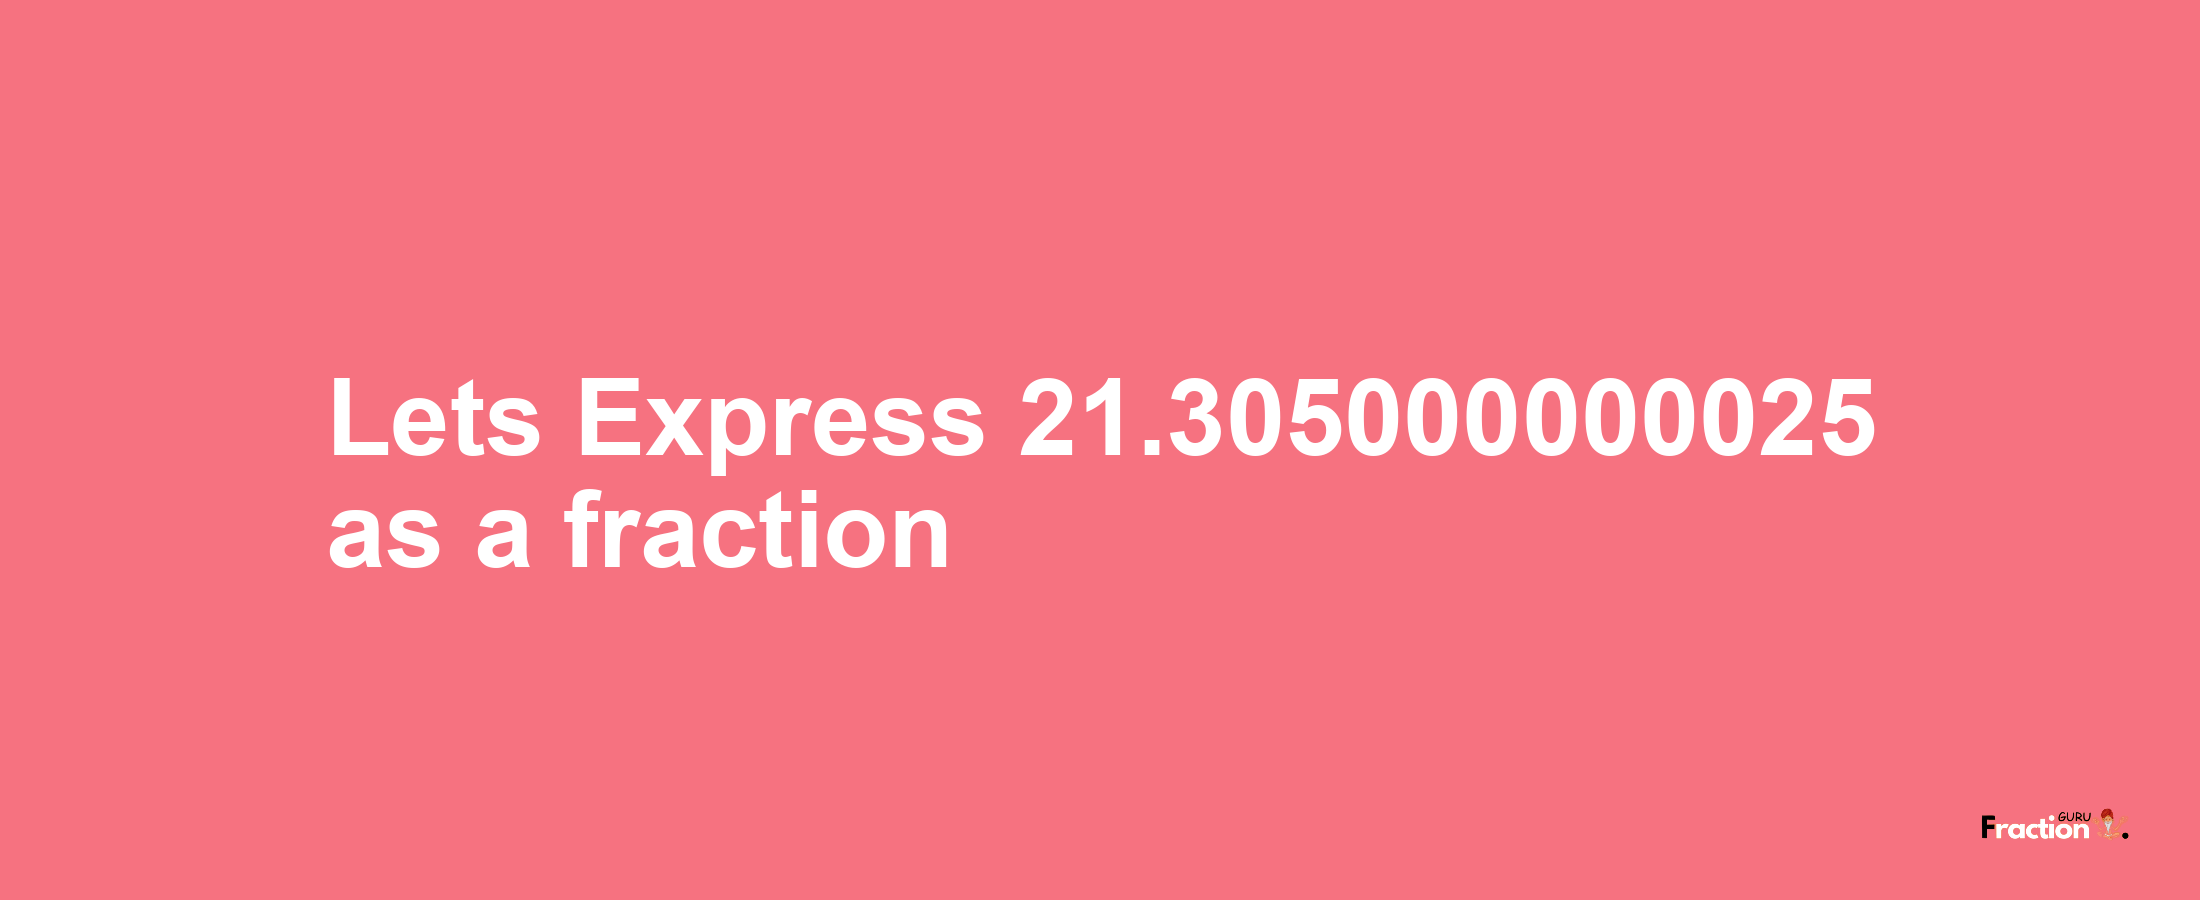 Lets Express 21.305000000025 as afraction